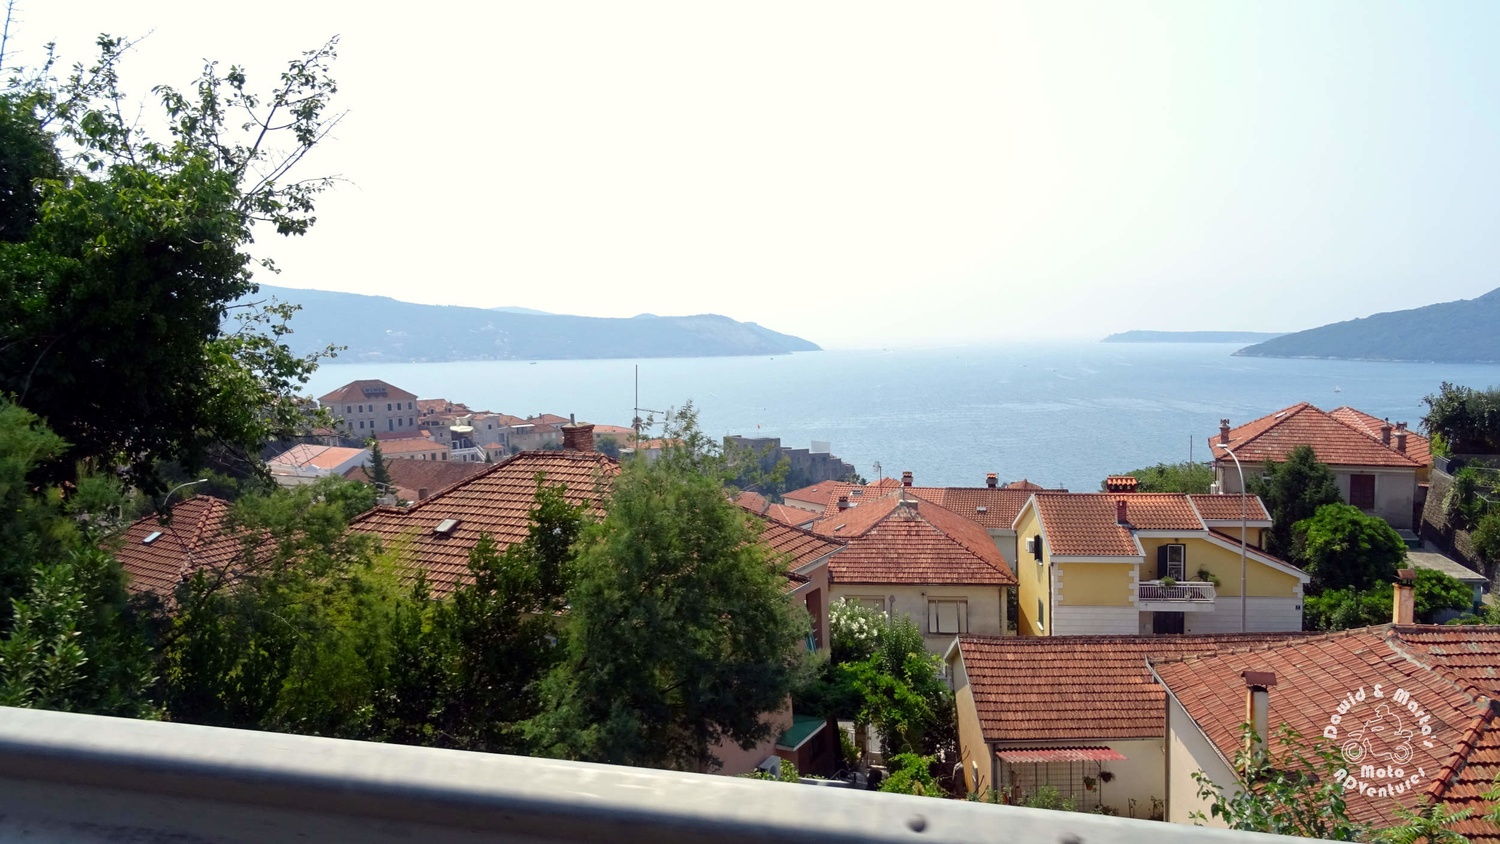 Glimpse at the Old Town of Herceg Novi from the Adriatic Highway